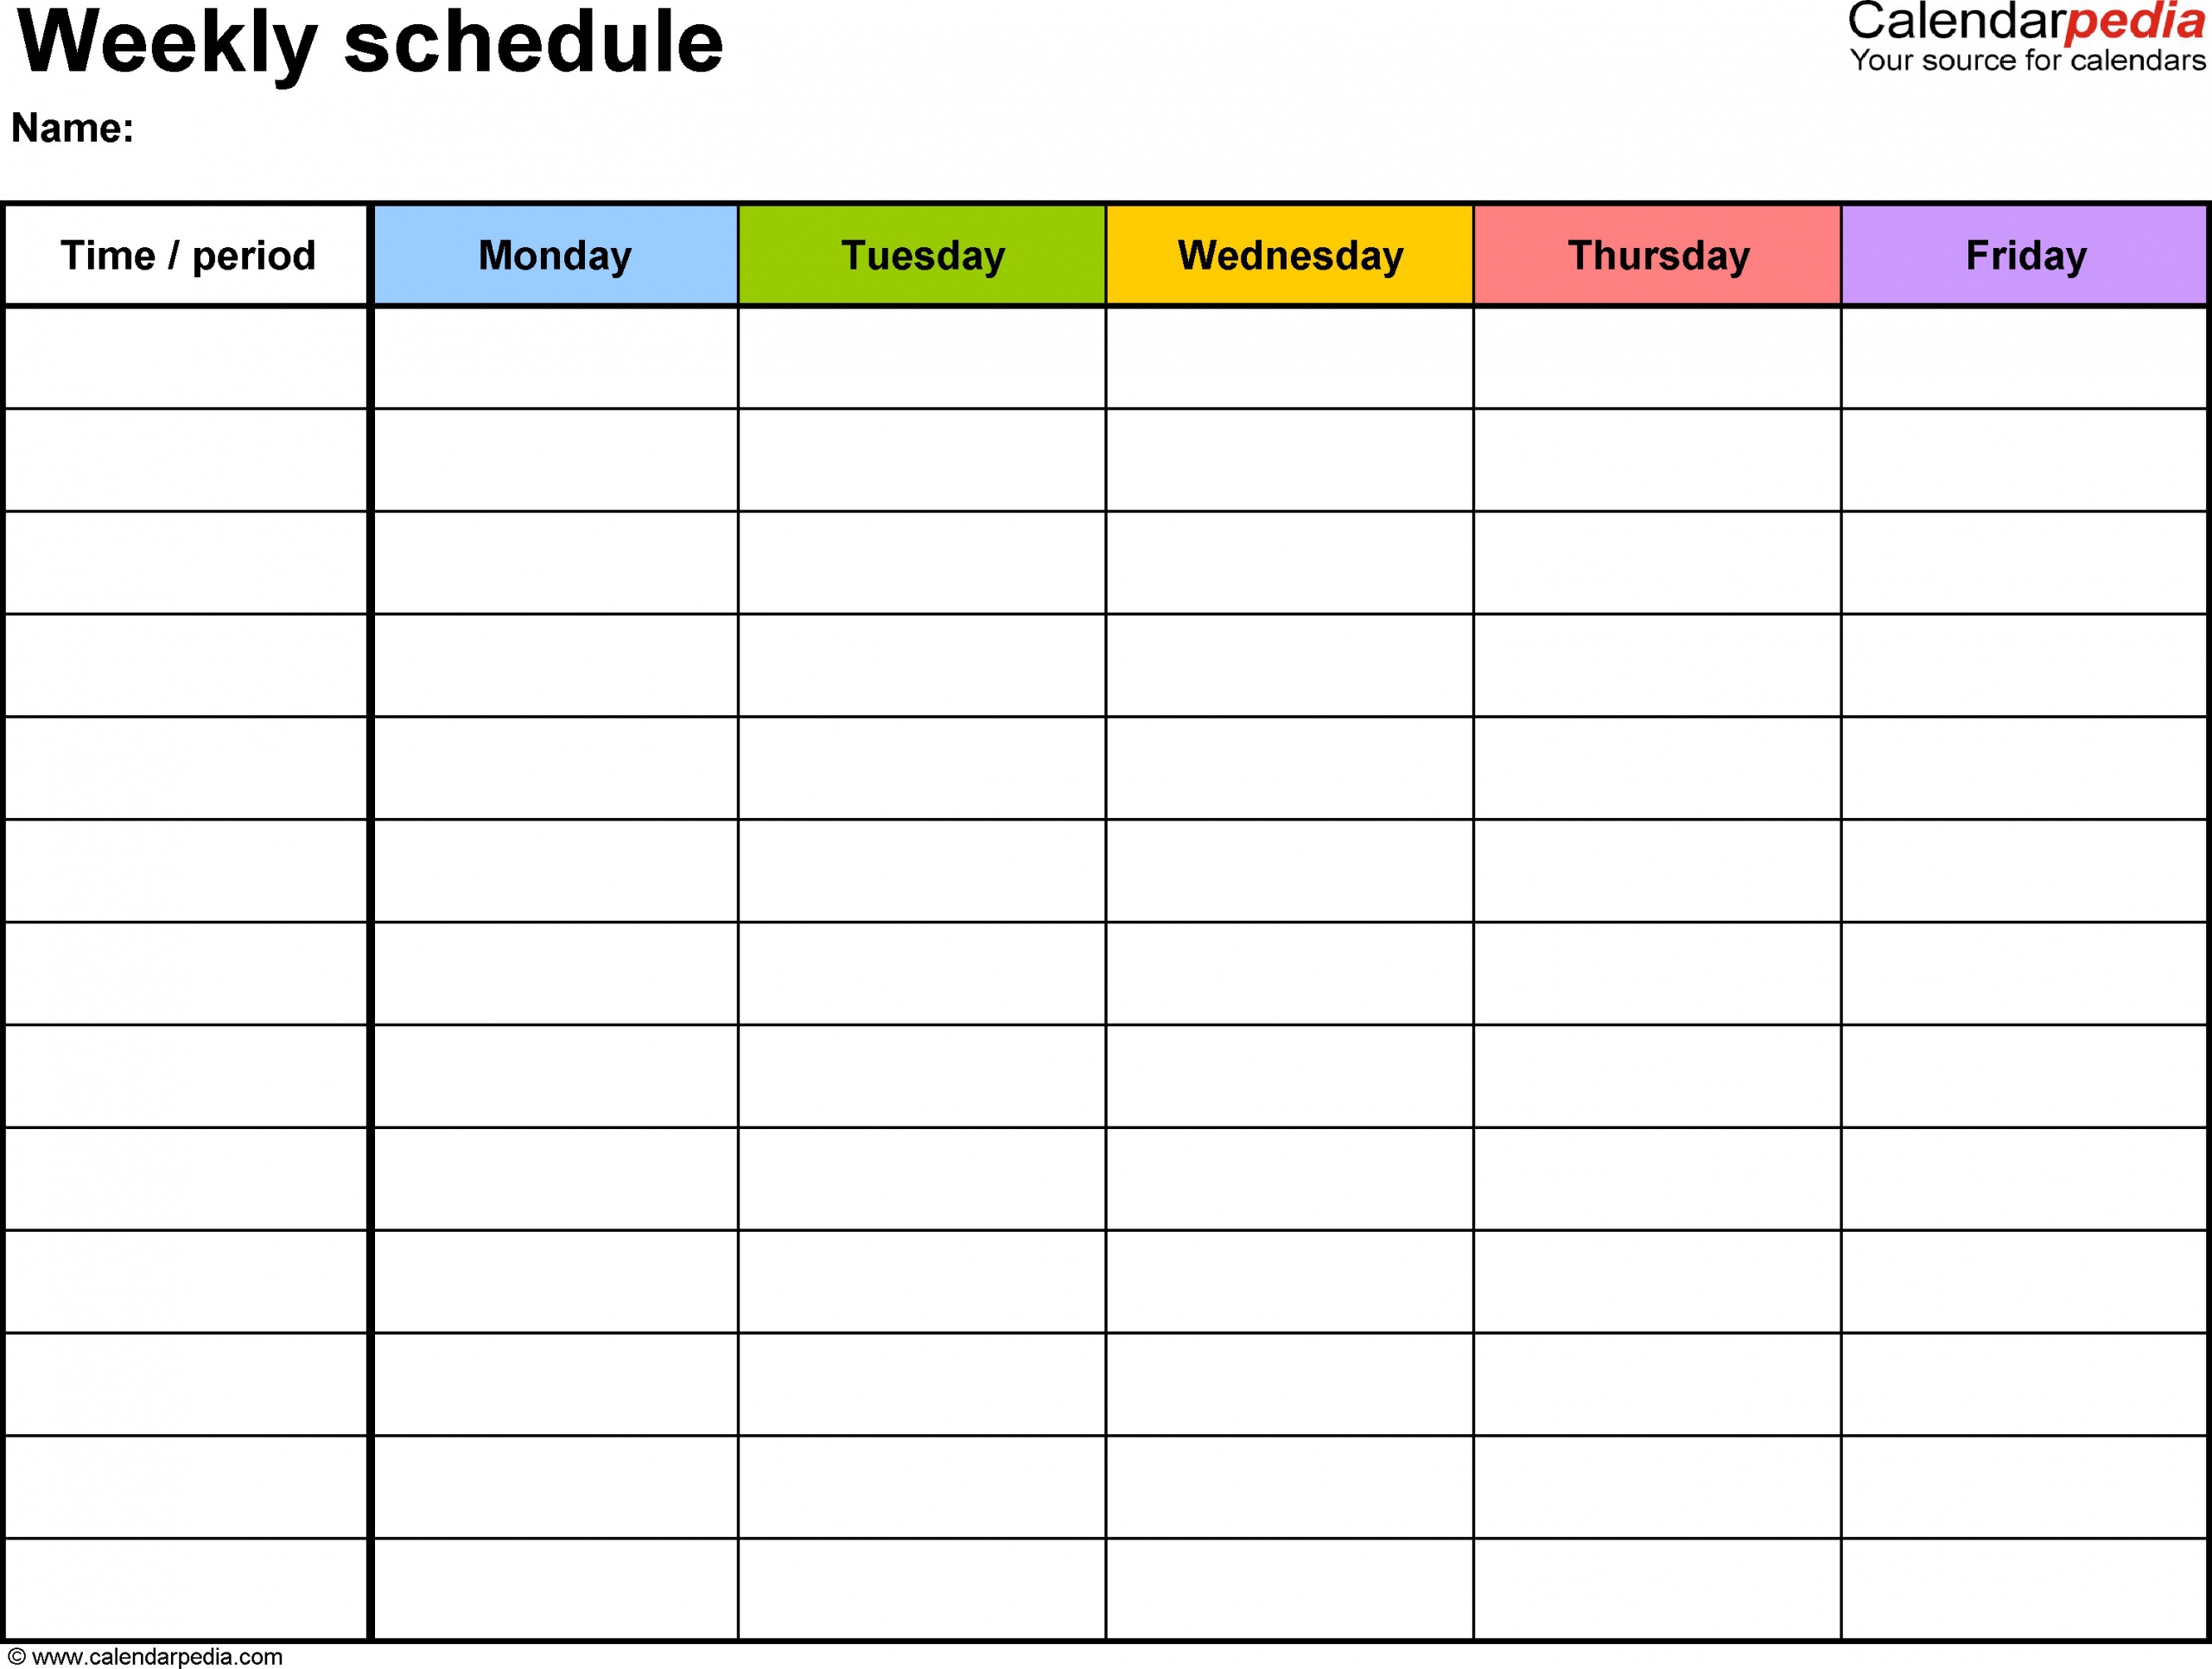 Monday Friday Calendar | Daily Schedule Template, Weekly Calendar Template Monday Through Sunday